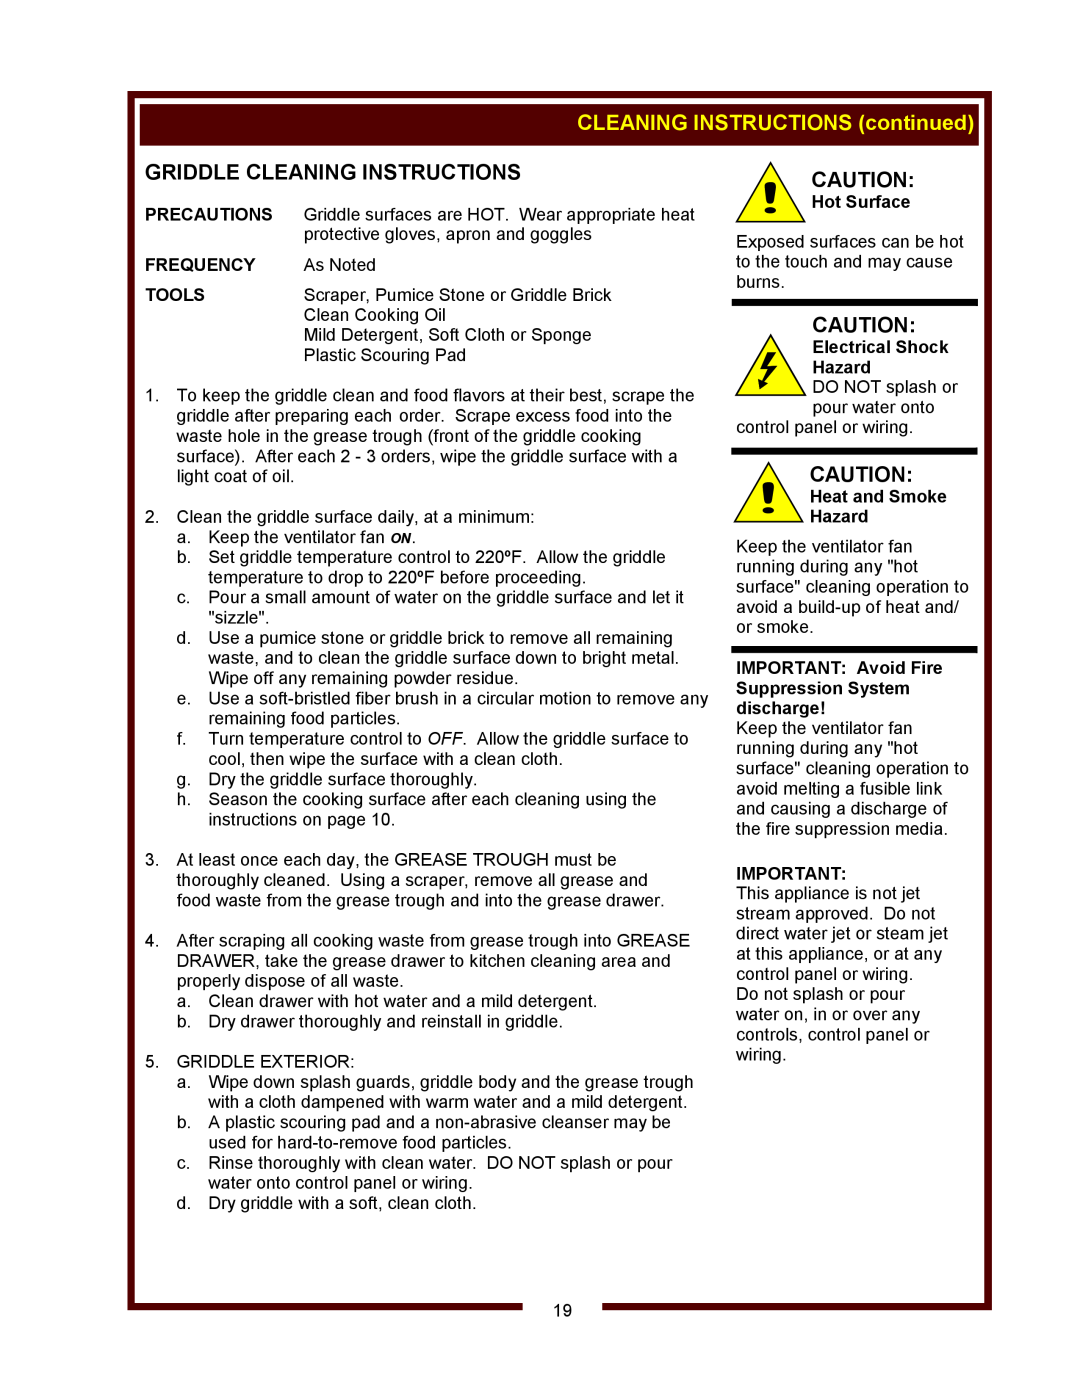 Bloomfield WVOC-2HFG CLEANING INSTRUCTIONS continued, Griddle Cleaning Instructions, Precautions, Frequency, Tools 